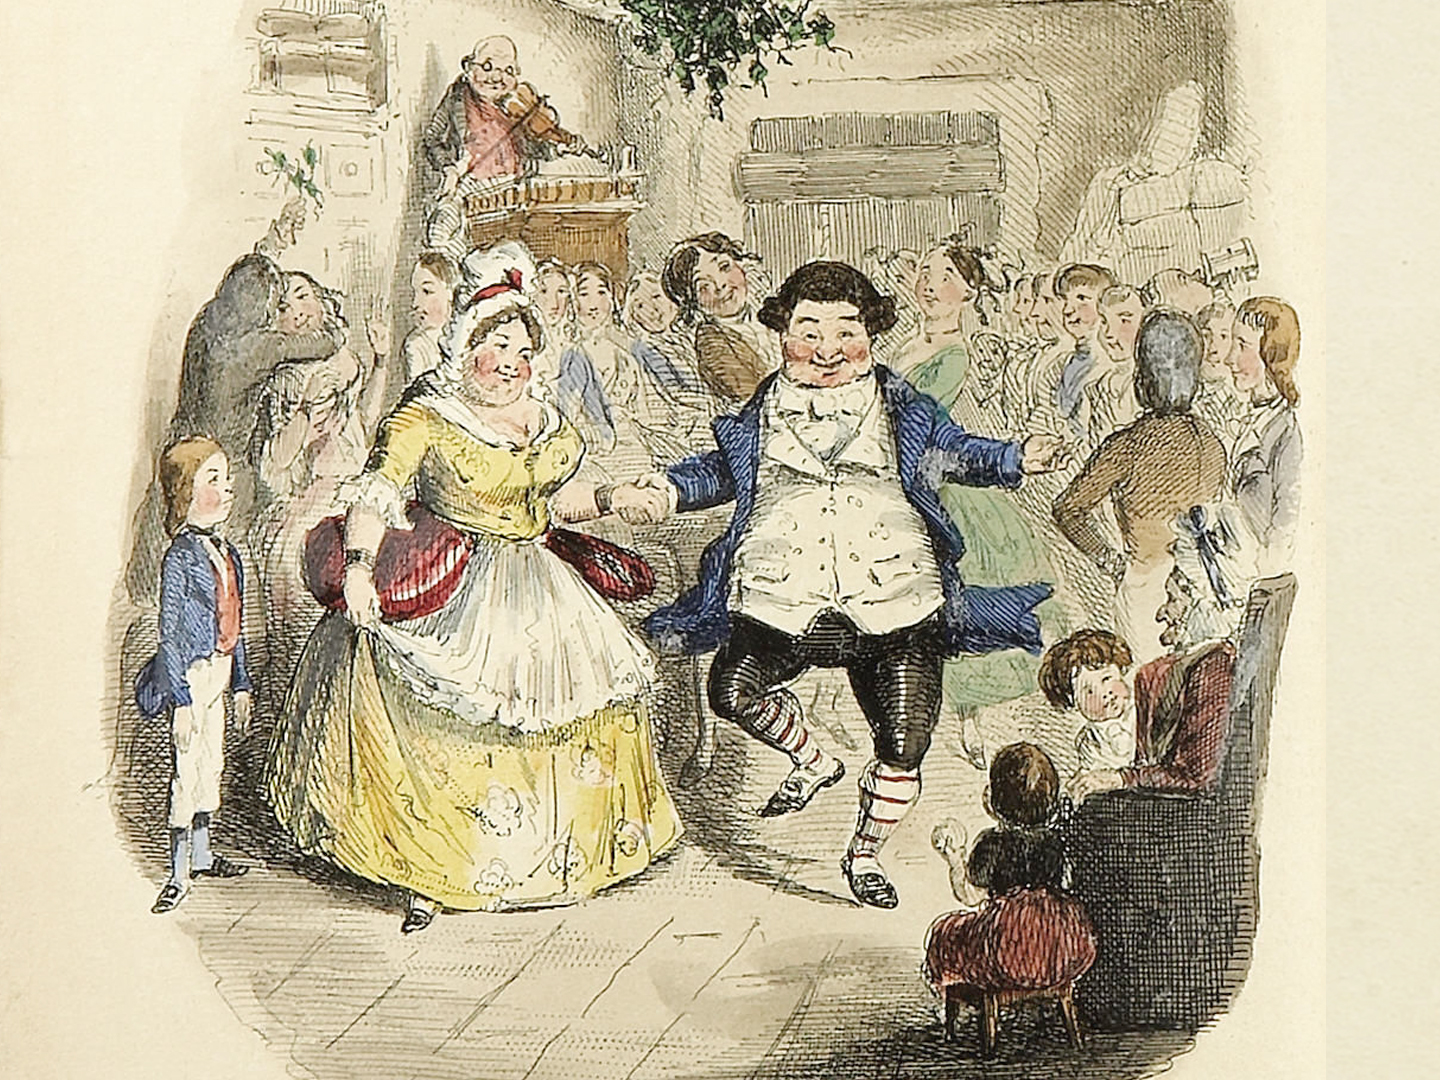 John Leech illustration "Old Fezziwig's Christmas Eve Ball" from "A Christmas Carol" by Charles Dickens (1843).